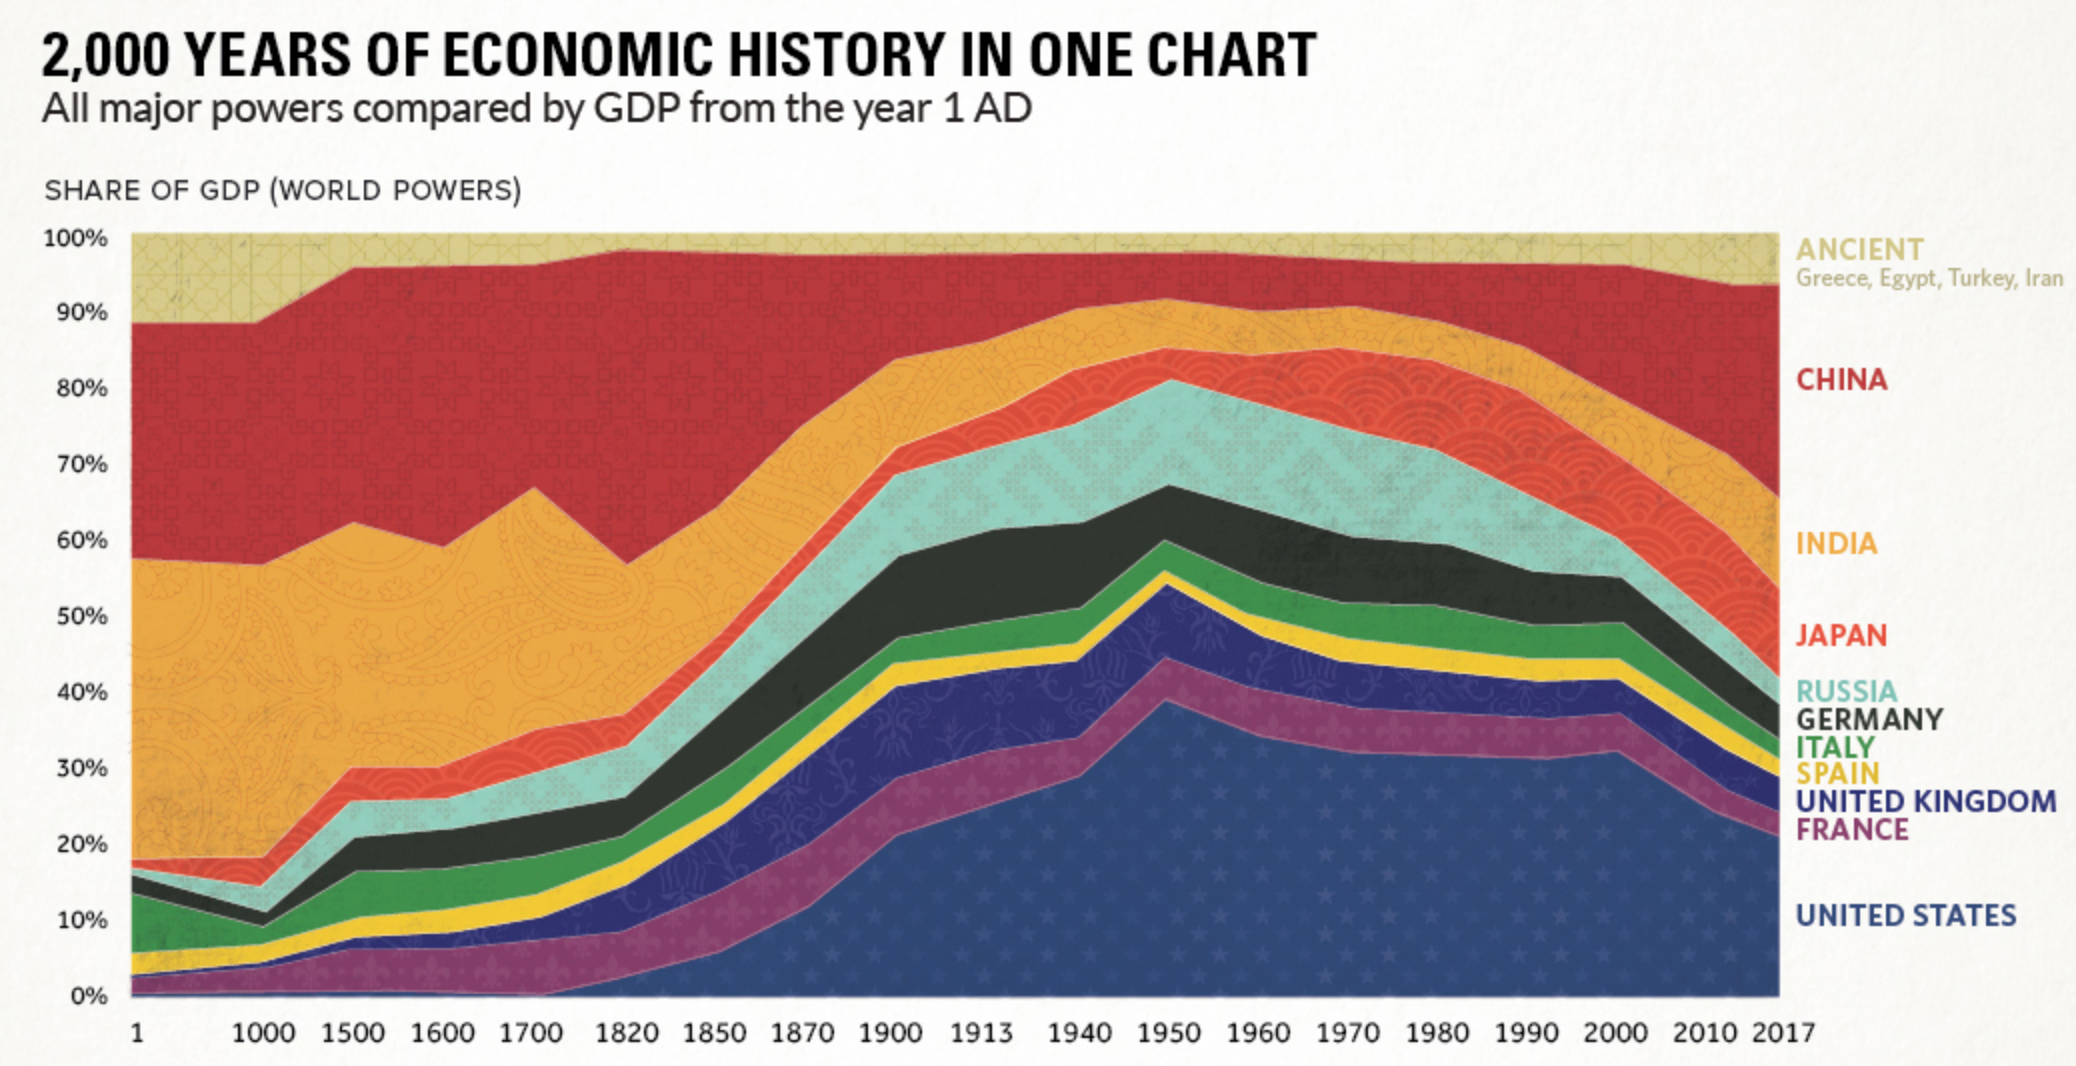 2000 years of GDP in one chart